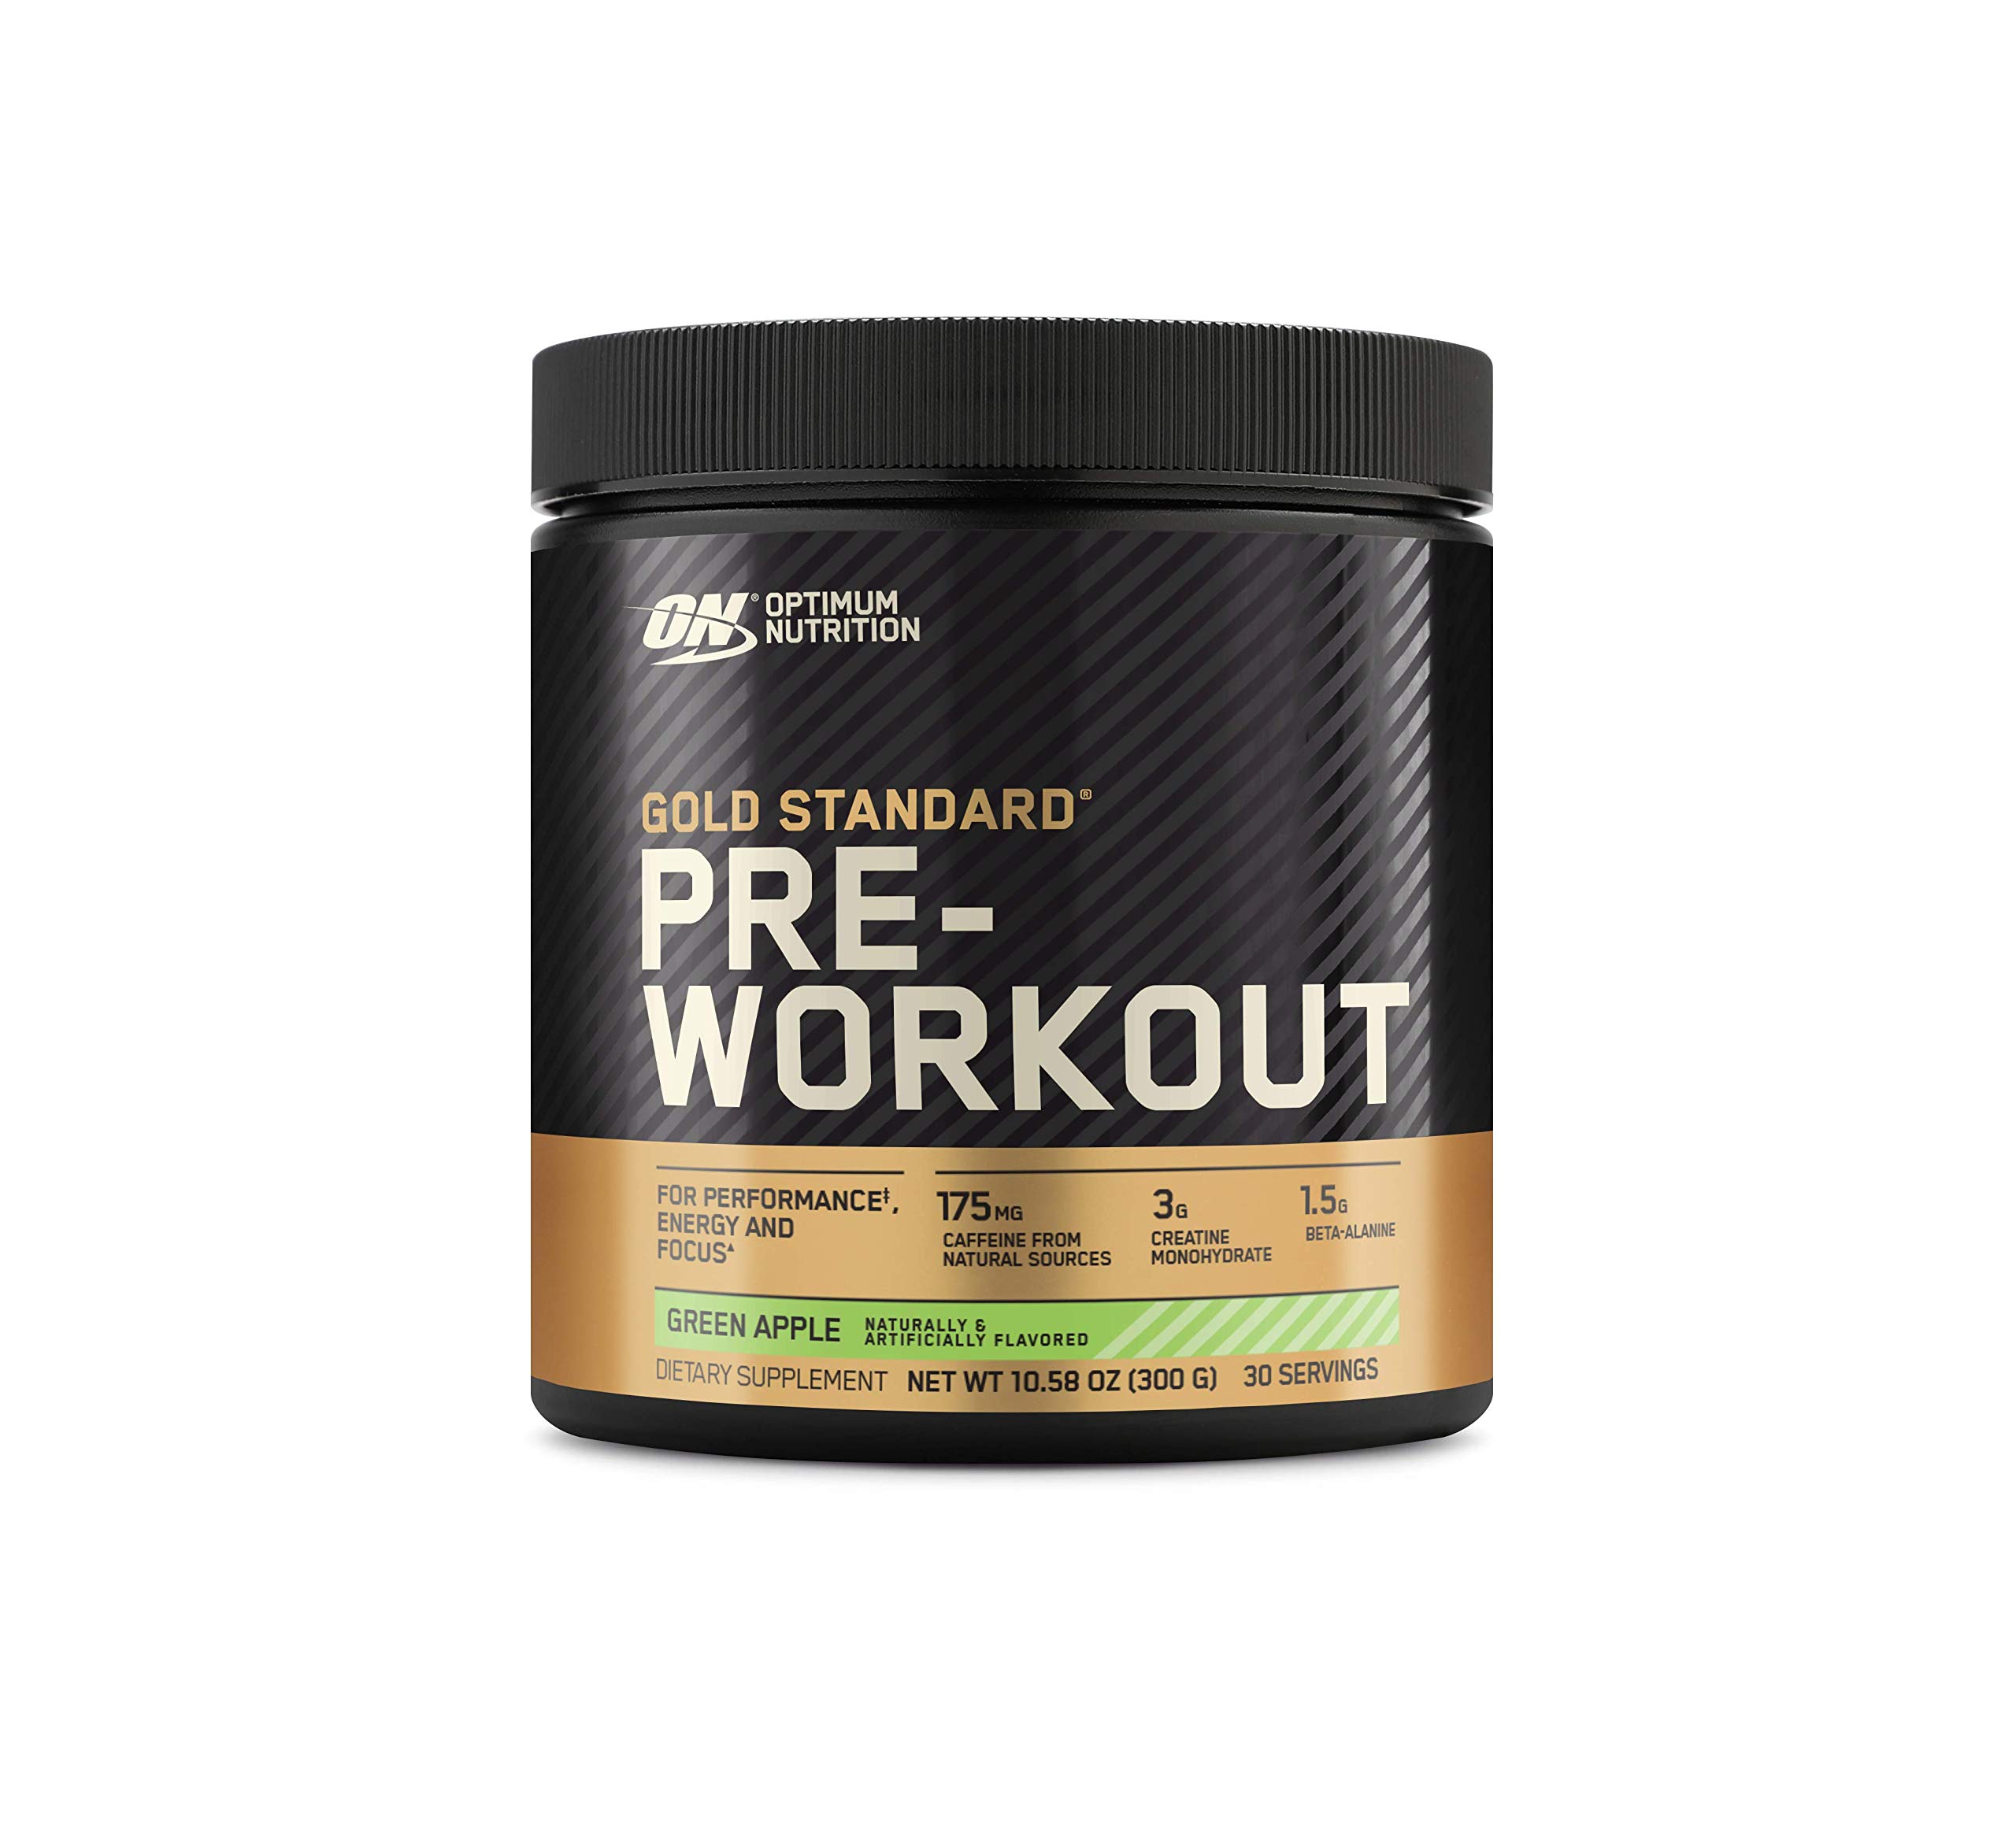 Book Cover Optimum Nutrition Gold Standard Pre Workout with Creatine, Beta-Alanine, and Caffeine for Energy, Flavor: Green Apple, 30 Servings (Packaging May Vary), Powder